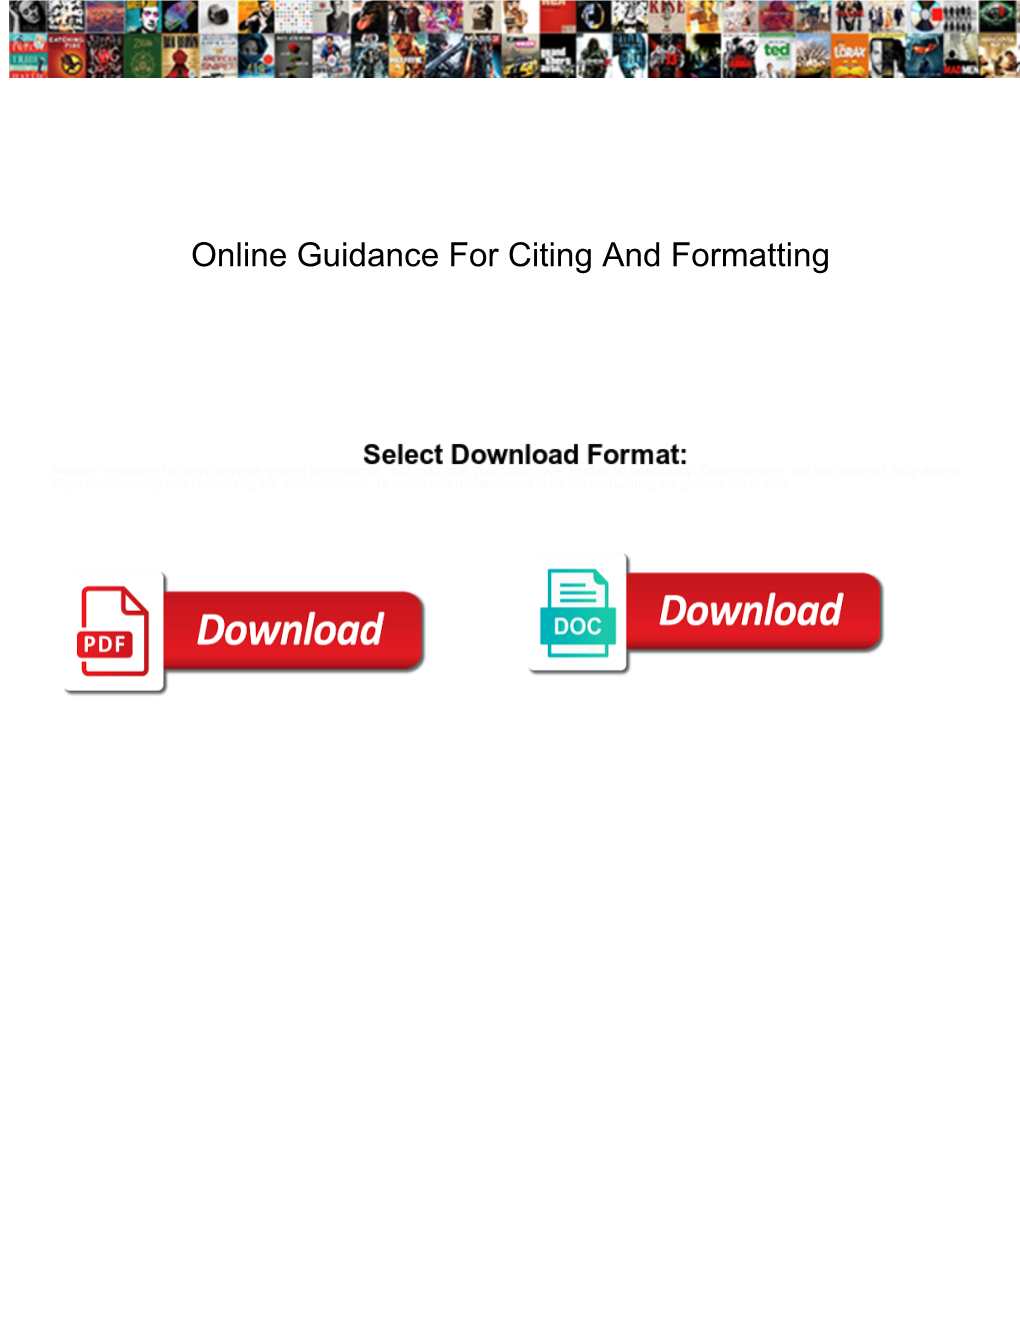 Online Guidance for Citing and Formatting